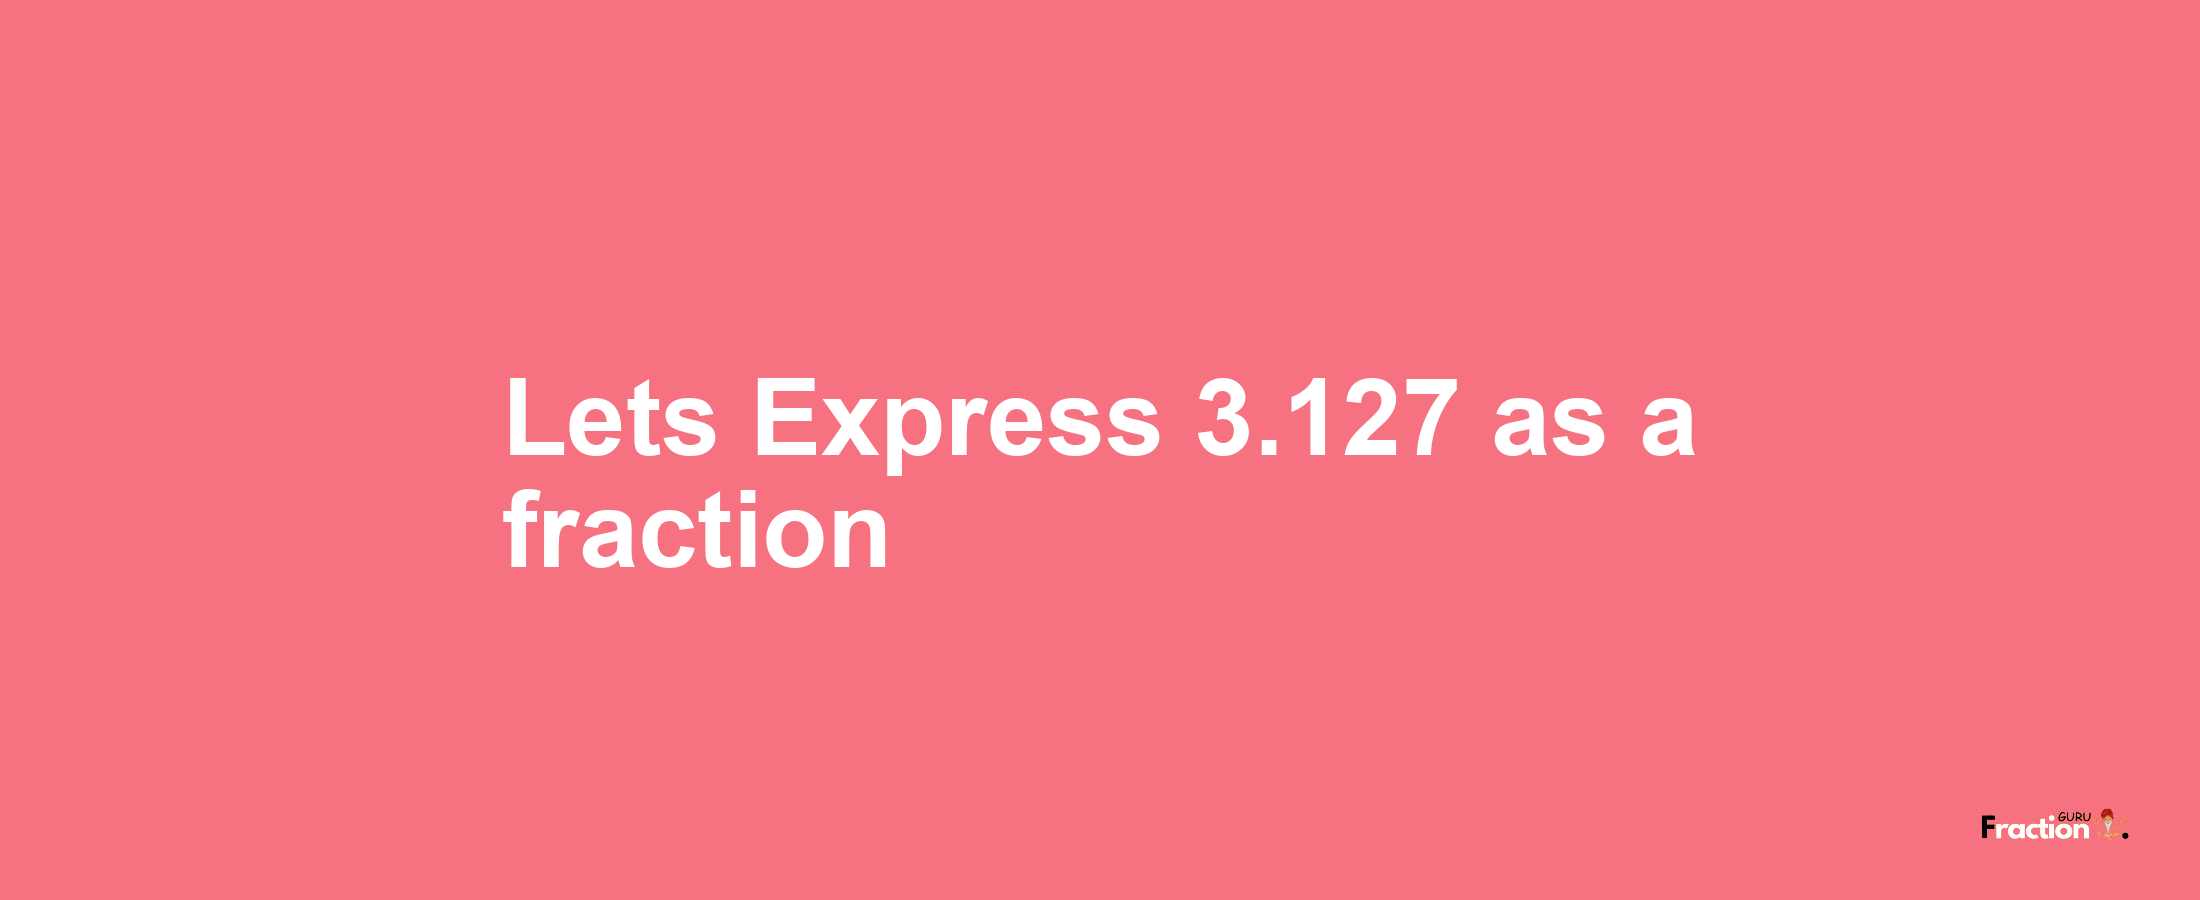 Lets Express 3.127 as afraction